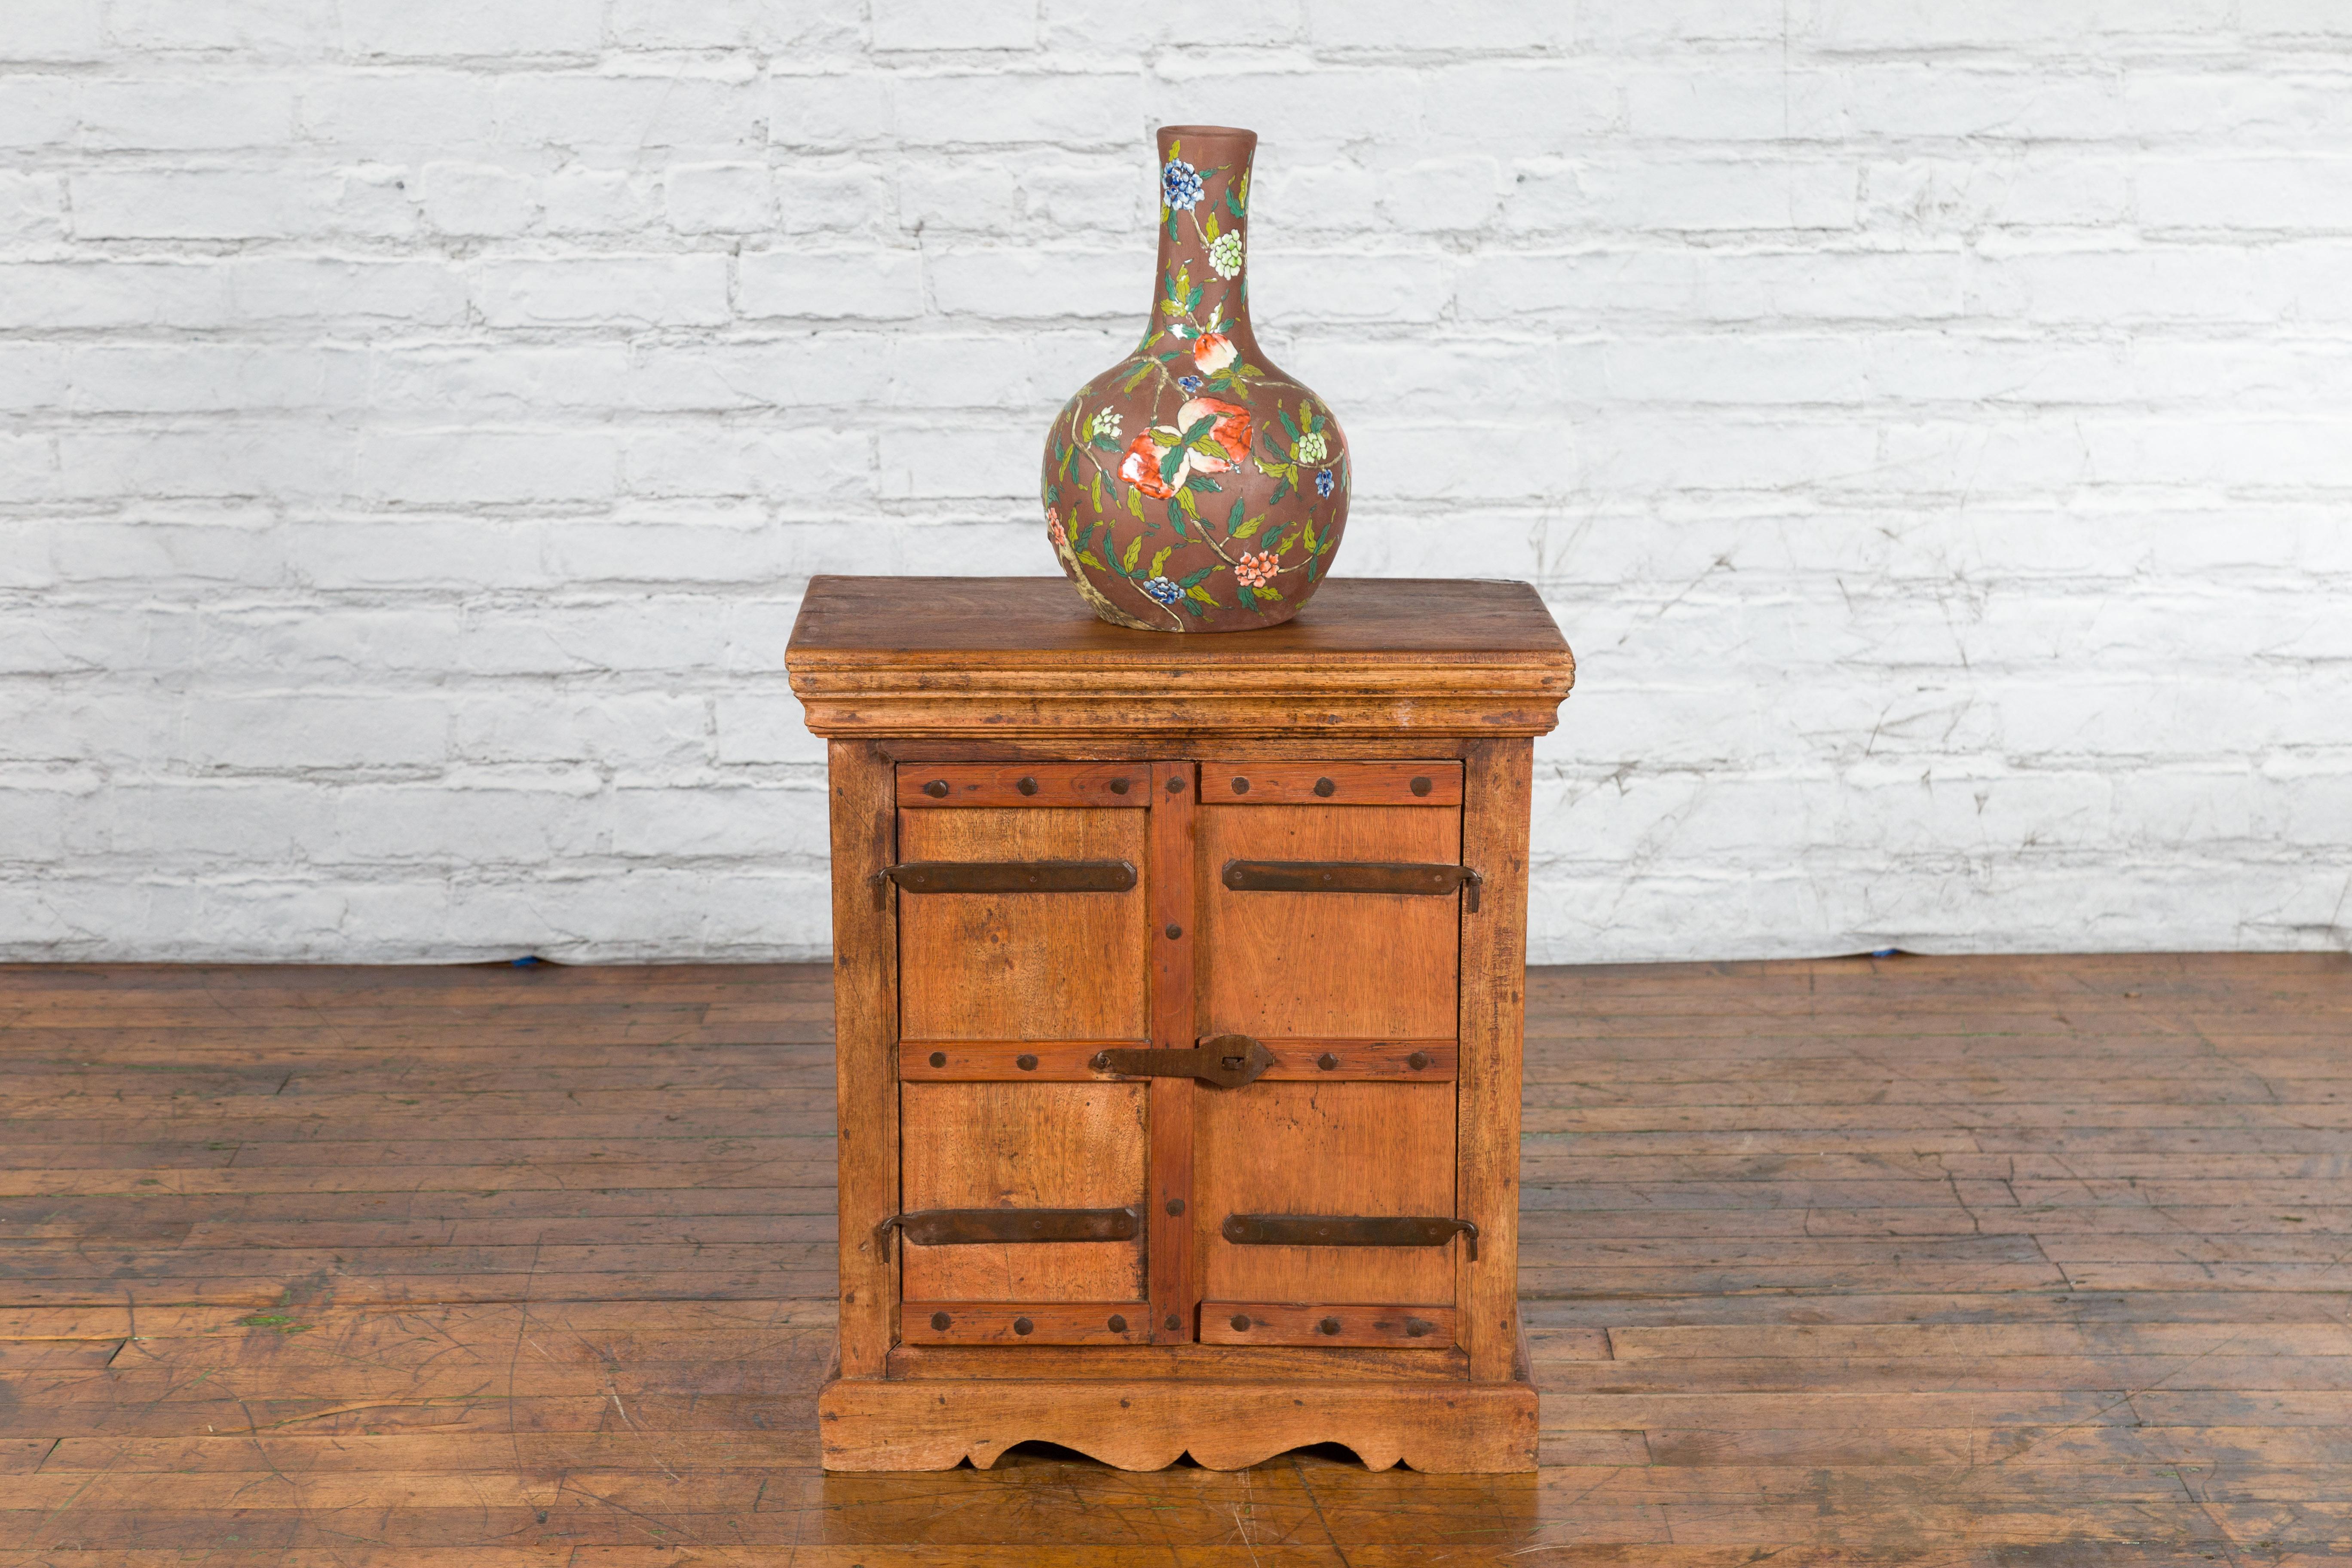 An Indian vintage sheesham wood single cabinet from the mid 20th century, with iron hardware, carved apron and natural patina. Created in India during the midcentury period, this small sheesham wood cabinet features a rectangular top sitting above